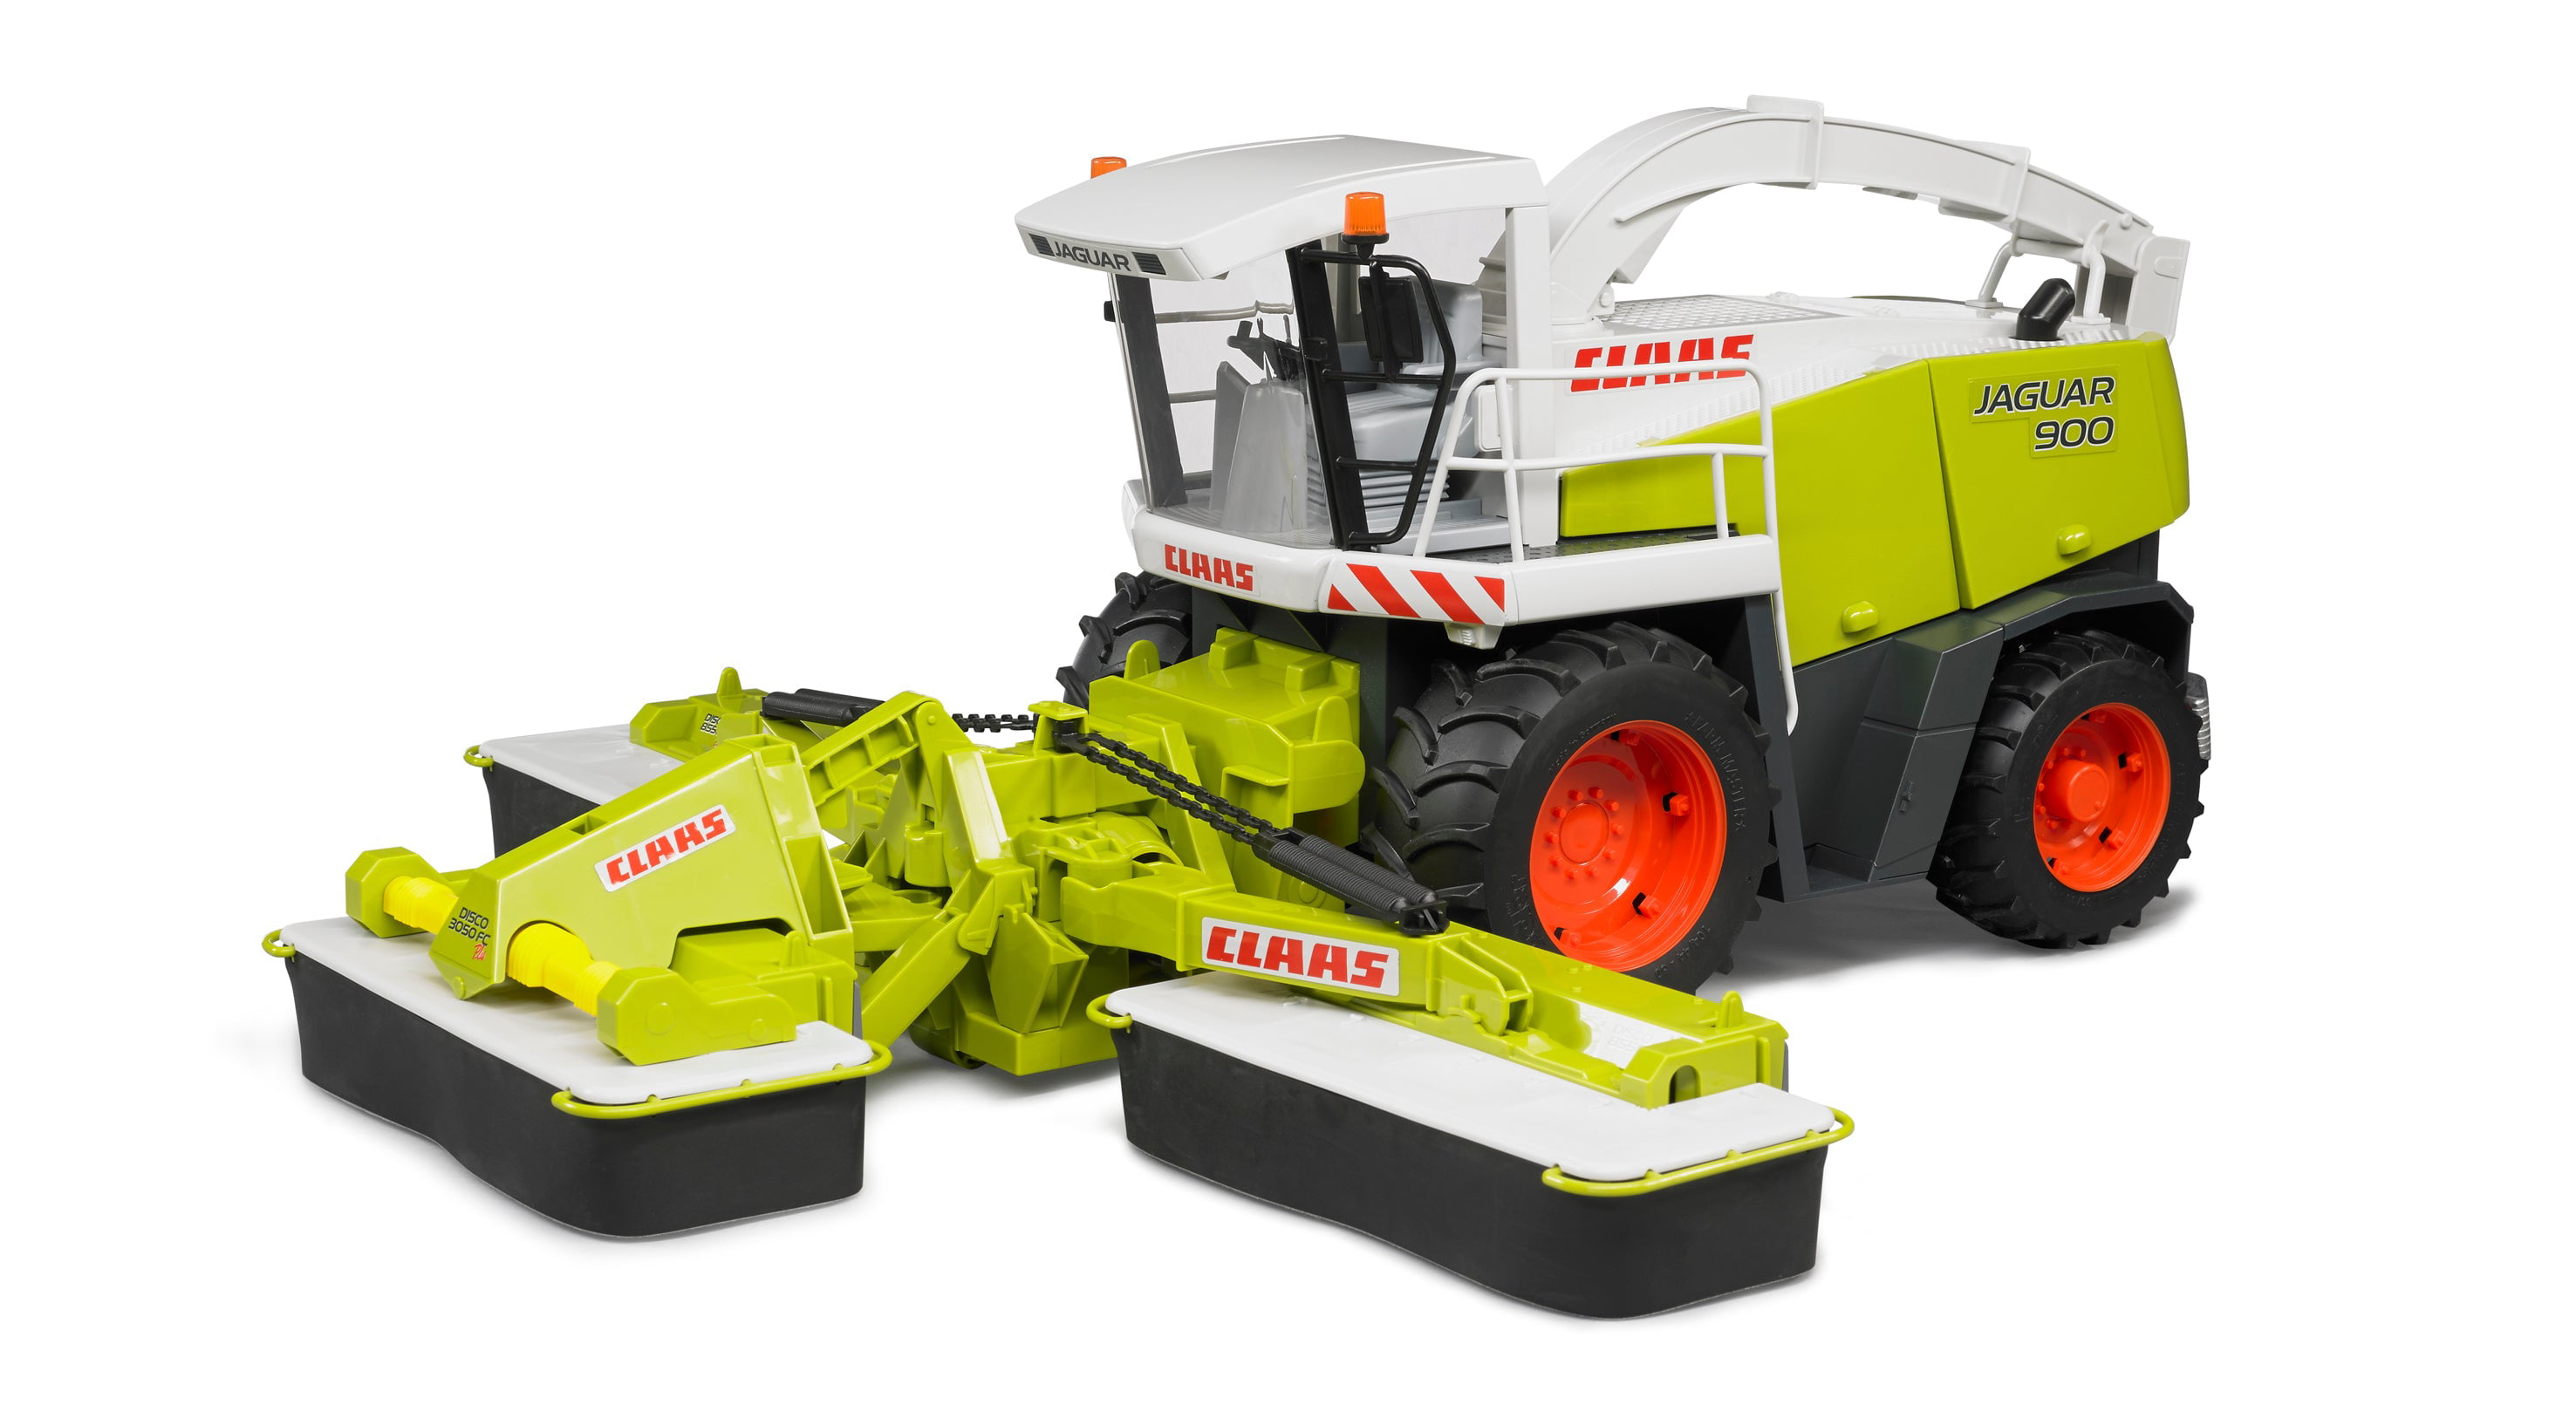  Bruder Claas Front Disc Mower 3050 FC Plus Front Mower Vehicle  : Toys & Games